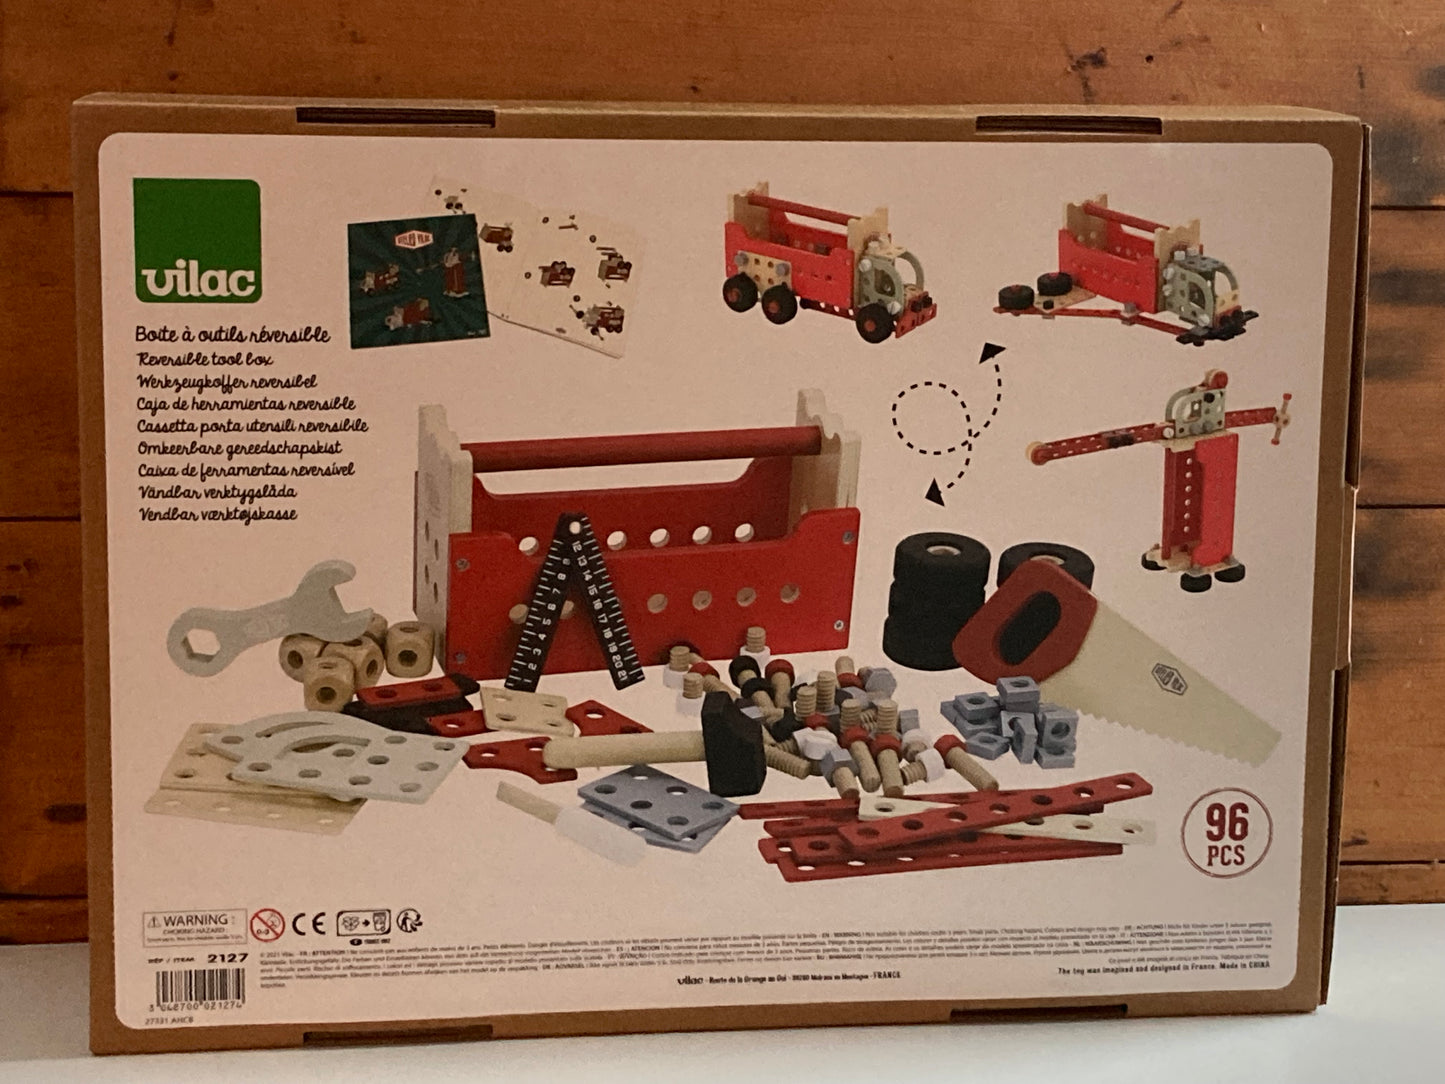 Educational Wooden Toy - CONVERTIBLE TOOL BOX WORKSHOP - build and construct with 96 pieces!